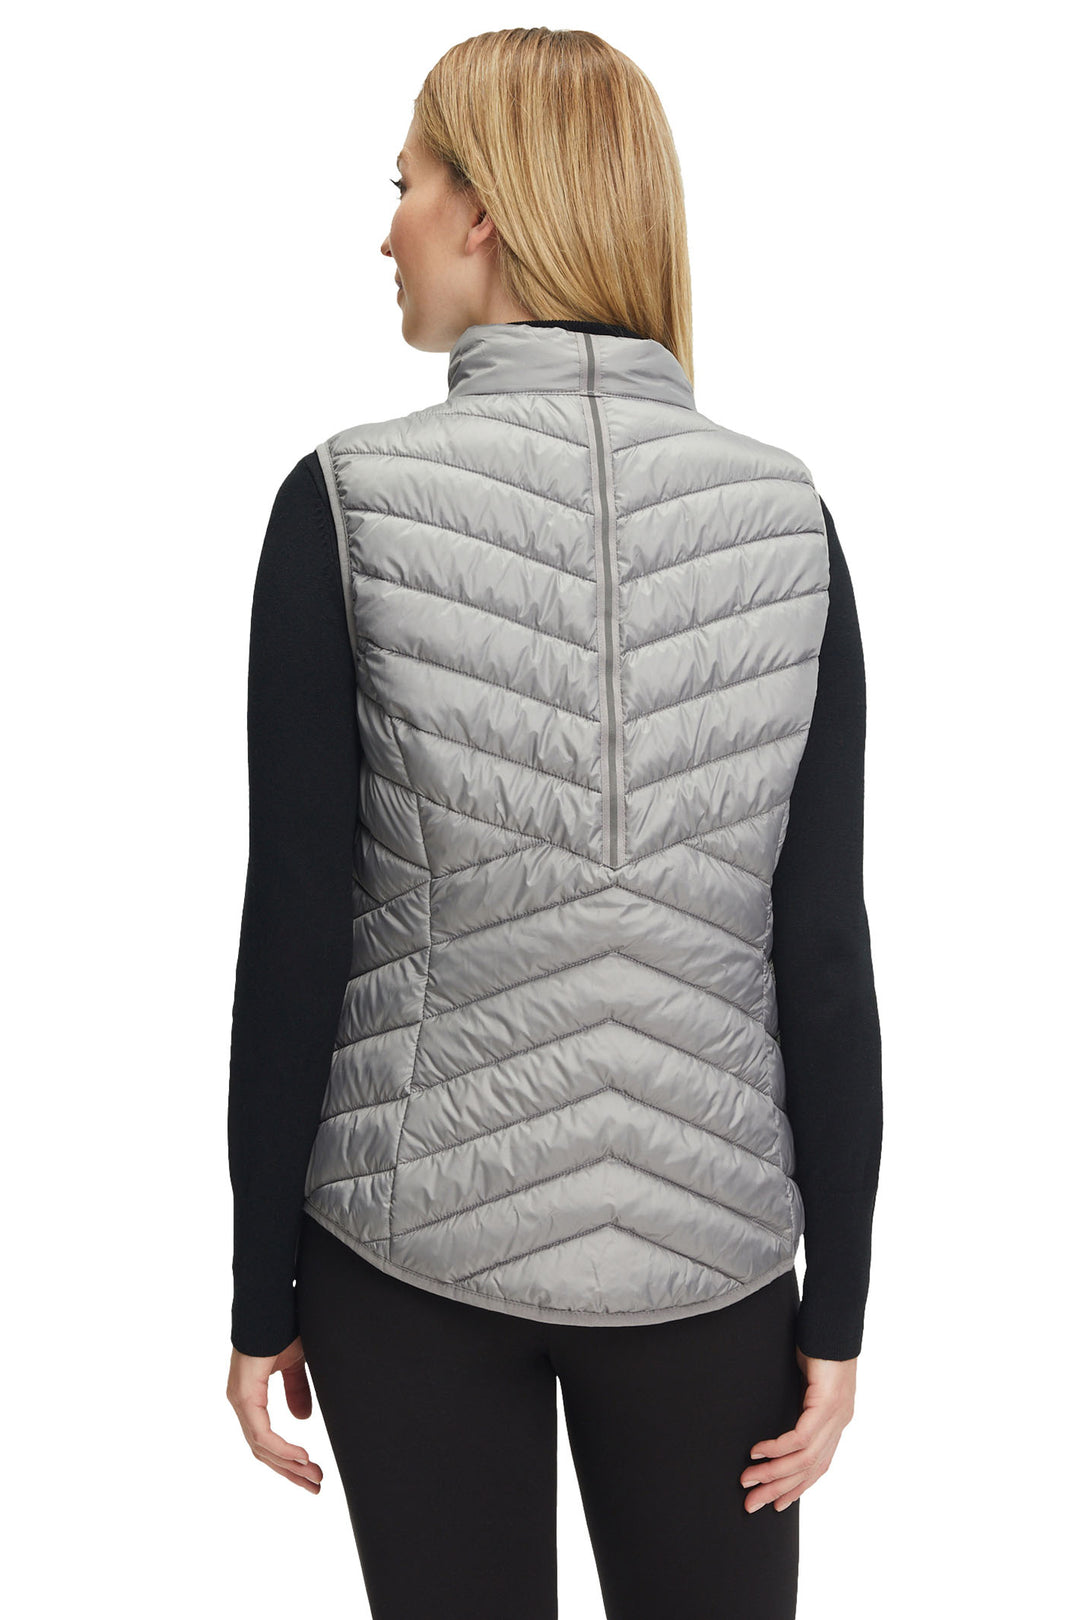 Betty Barclay 75322908 9156 Grey Light Weight Short Padded Gilet - Dotique Chesterfield